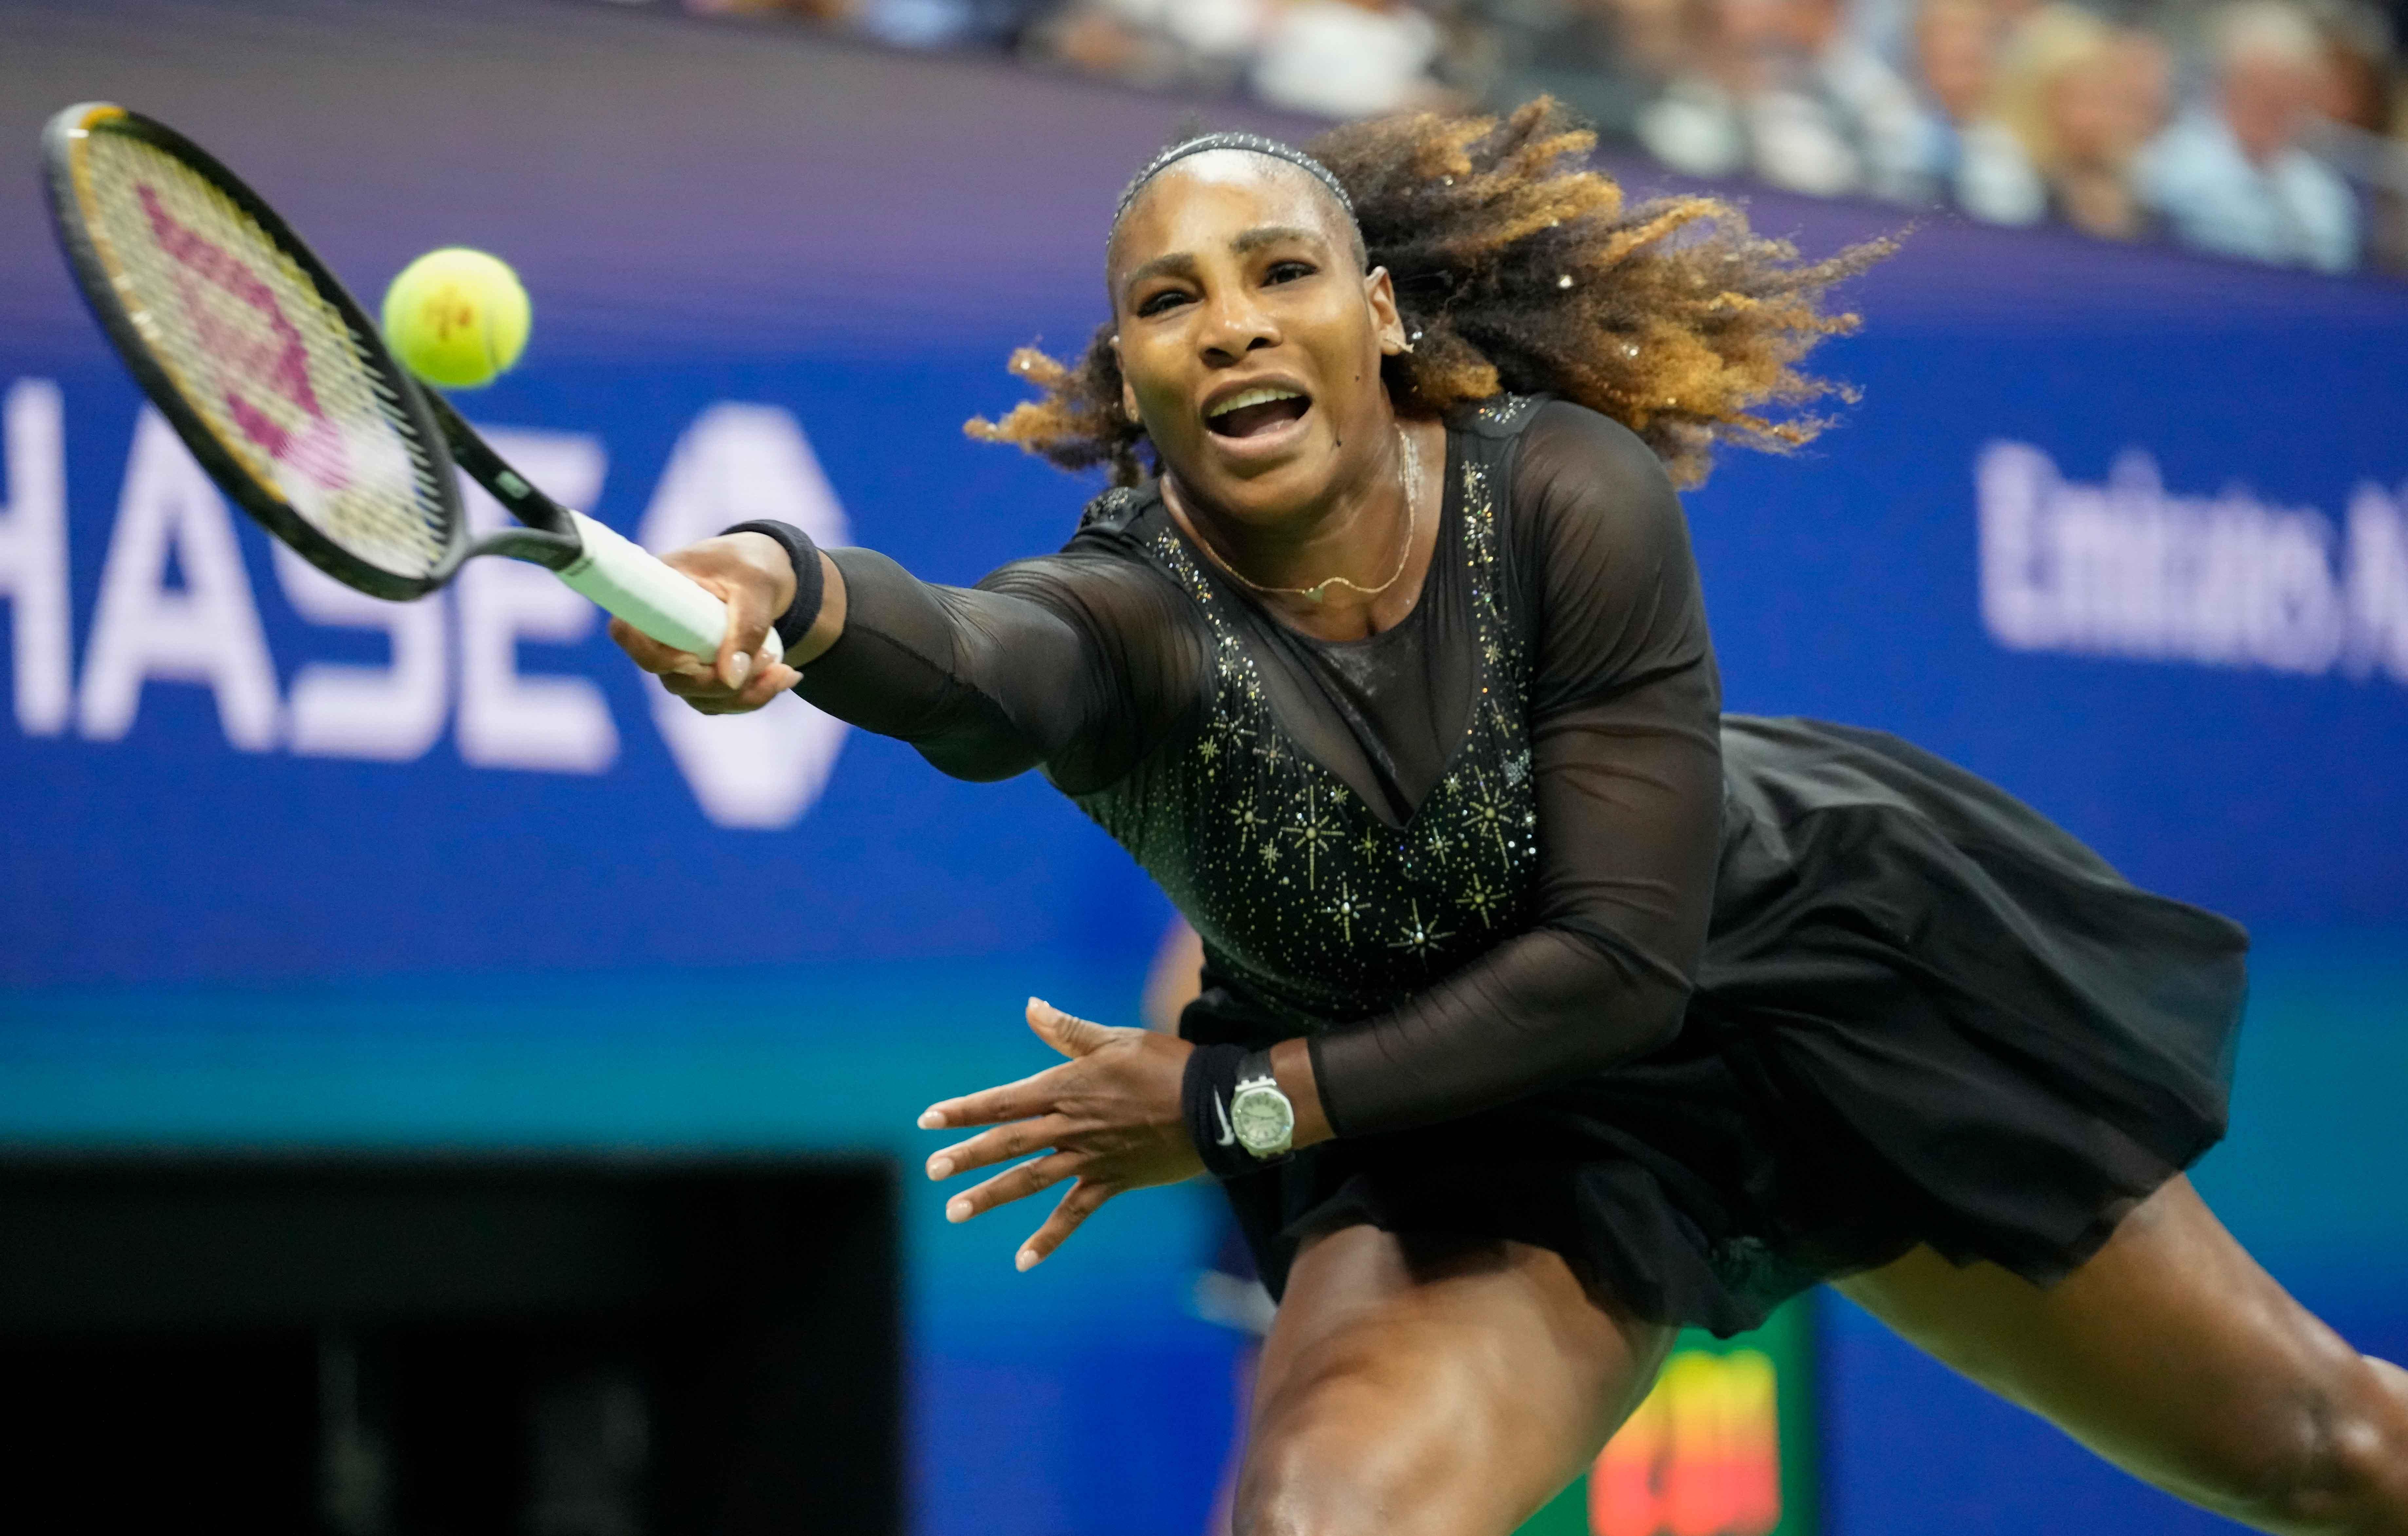 Alexis Ohanian Praises Serena Williams Ahead of Expected Retirement